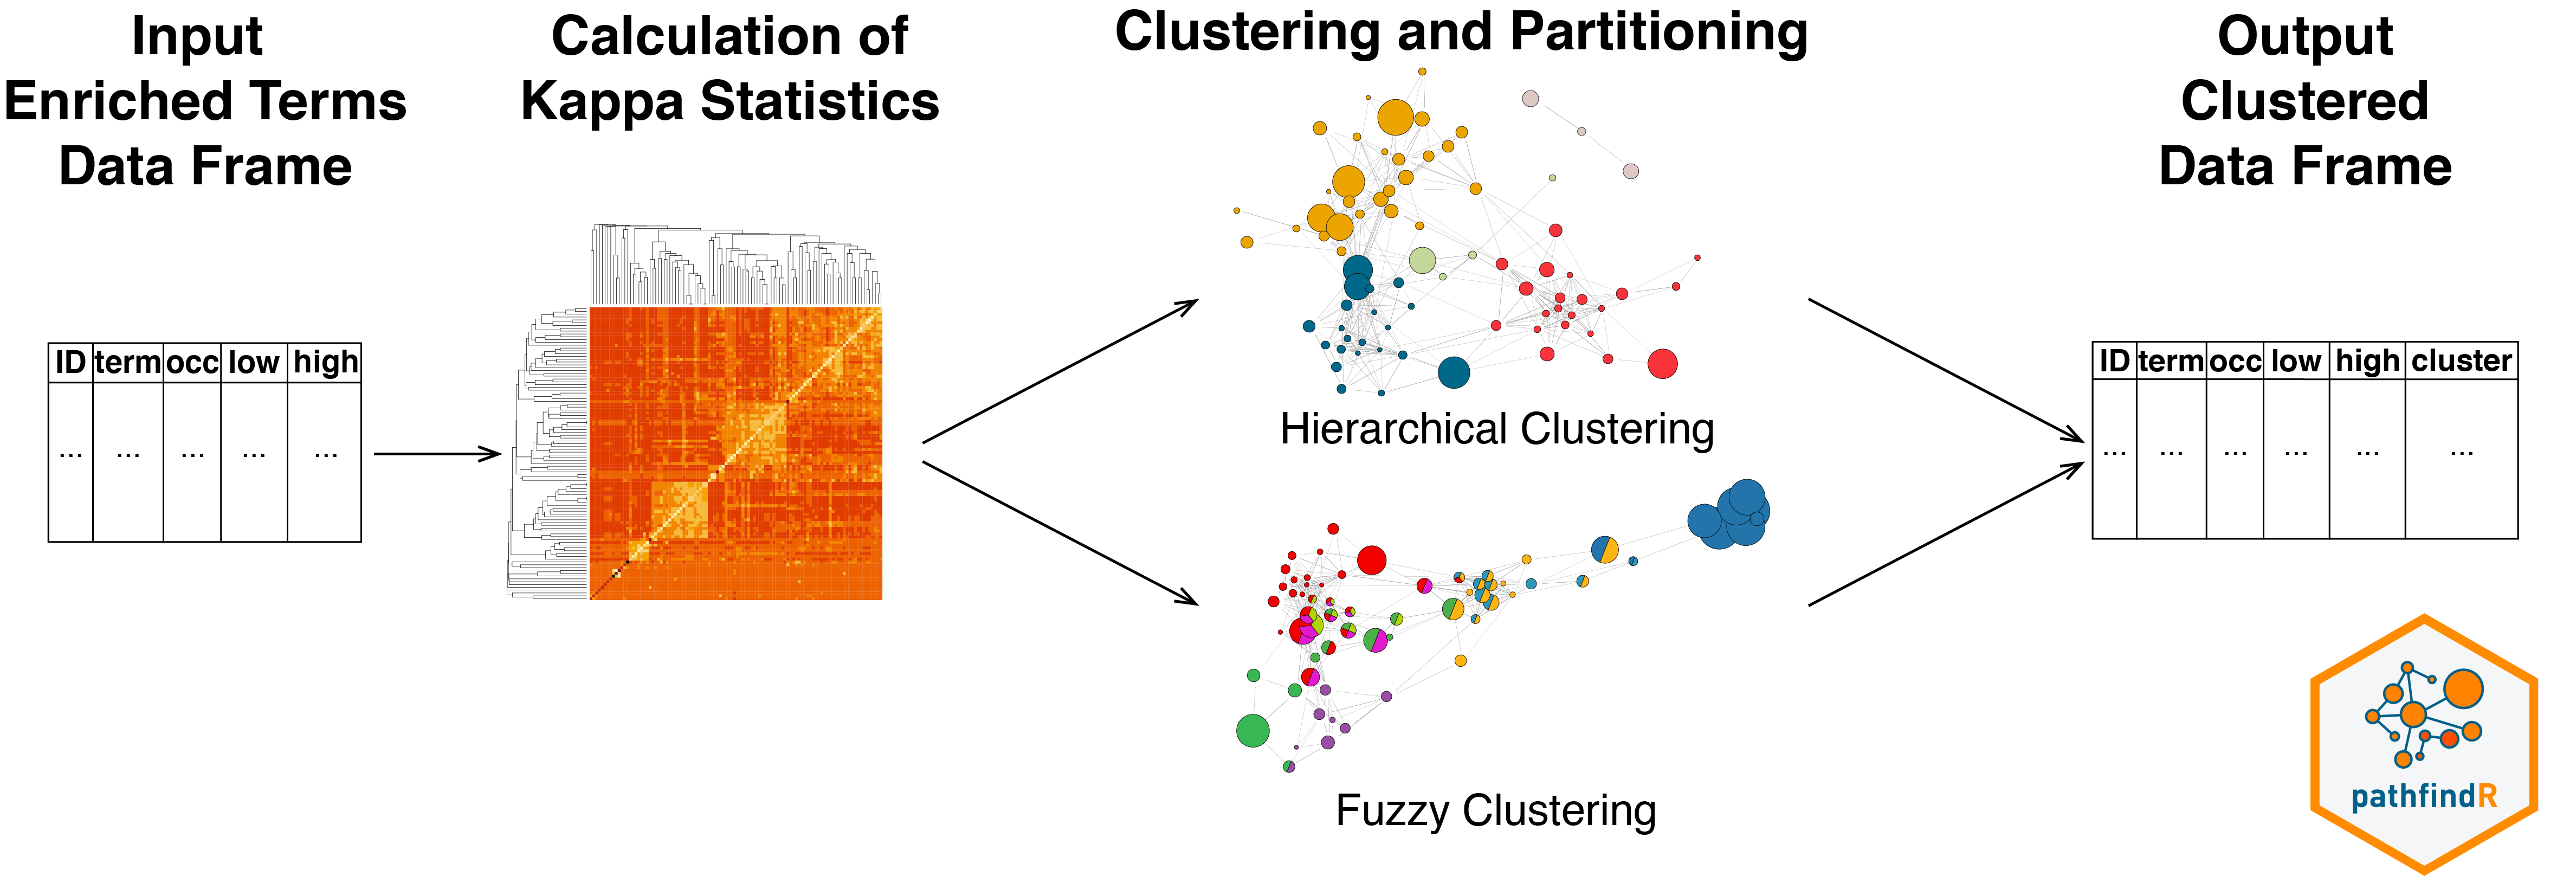 Enriched Terms Clustering Workflow